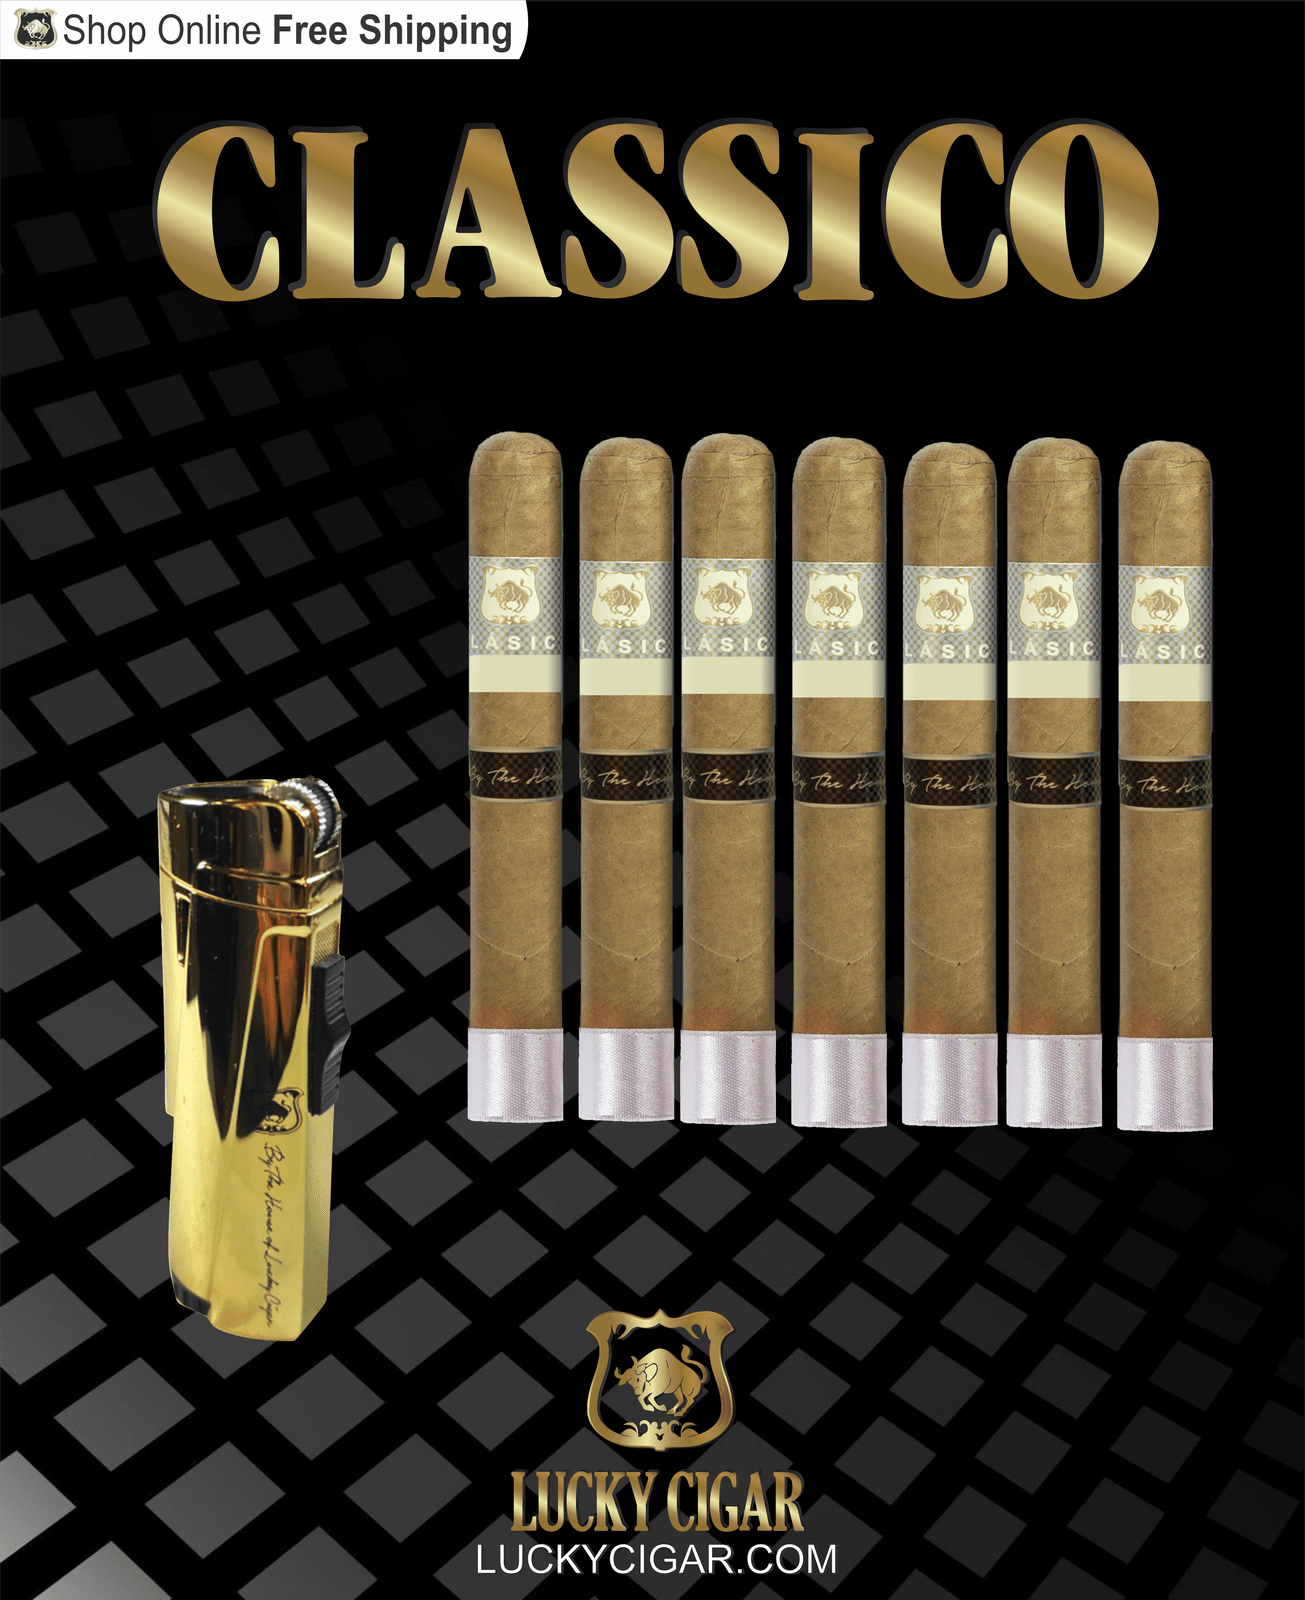 Lucky Cigar Sampler Sets: Set of 7 Classico Toro 6x50 Cigars with Torch